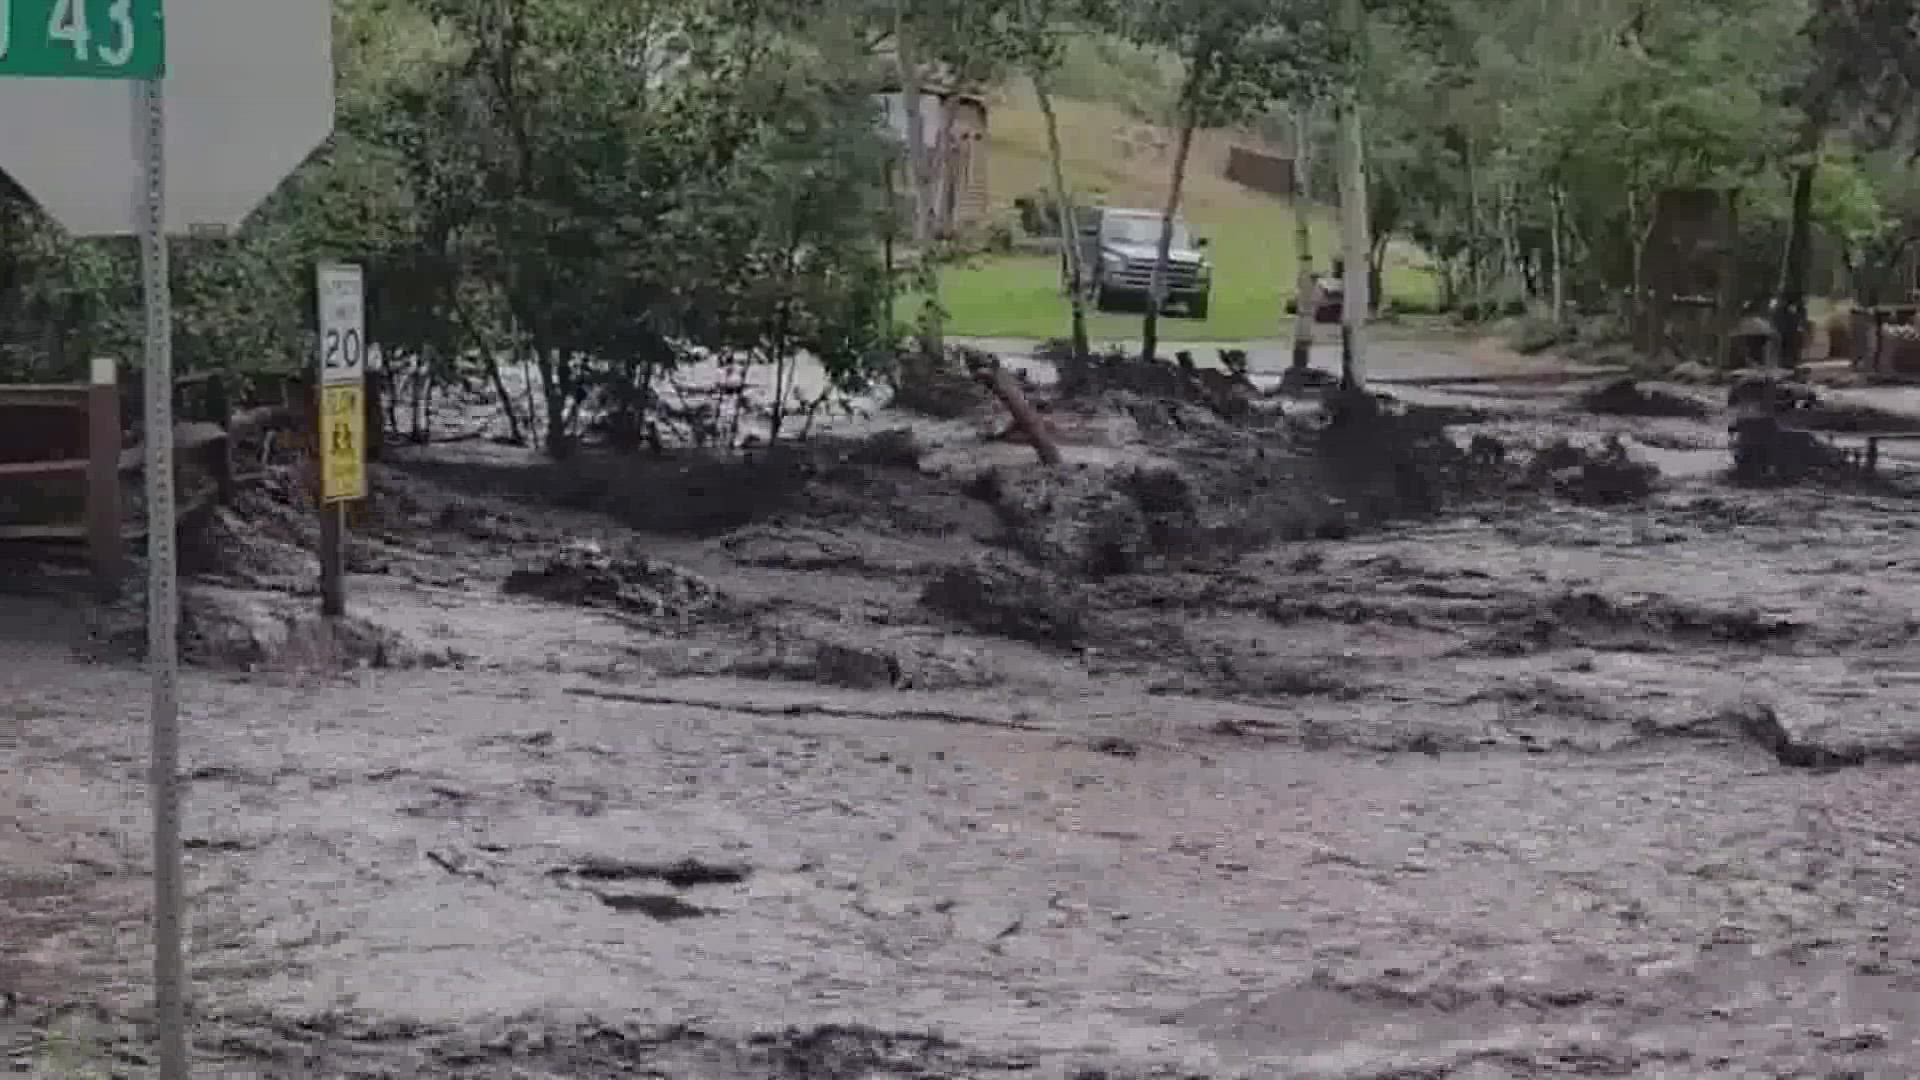 Heavy rain fell on the Cameron Peak burn scar on Friday. Our Jaleesa Irizarry explains why these floods are happening and what agencies are doing to mitigate them.